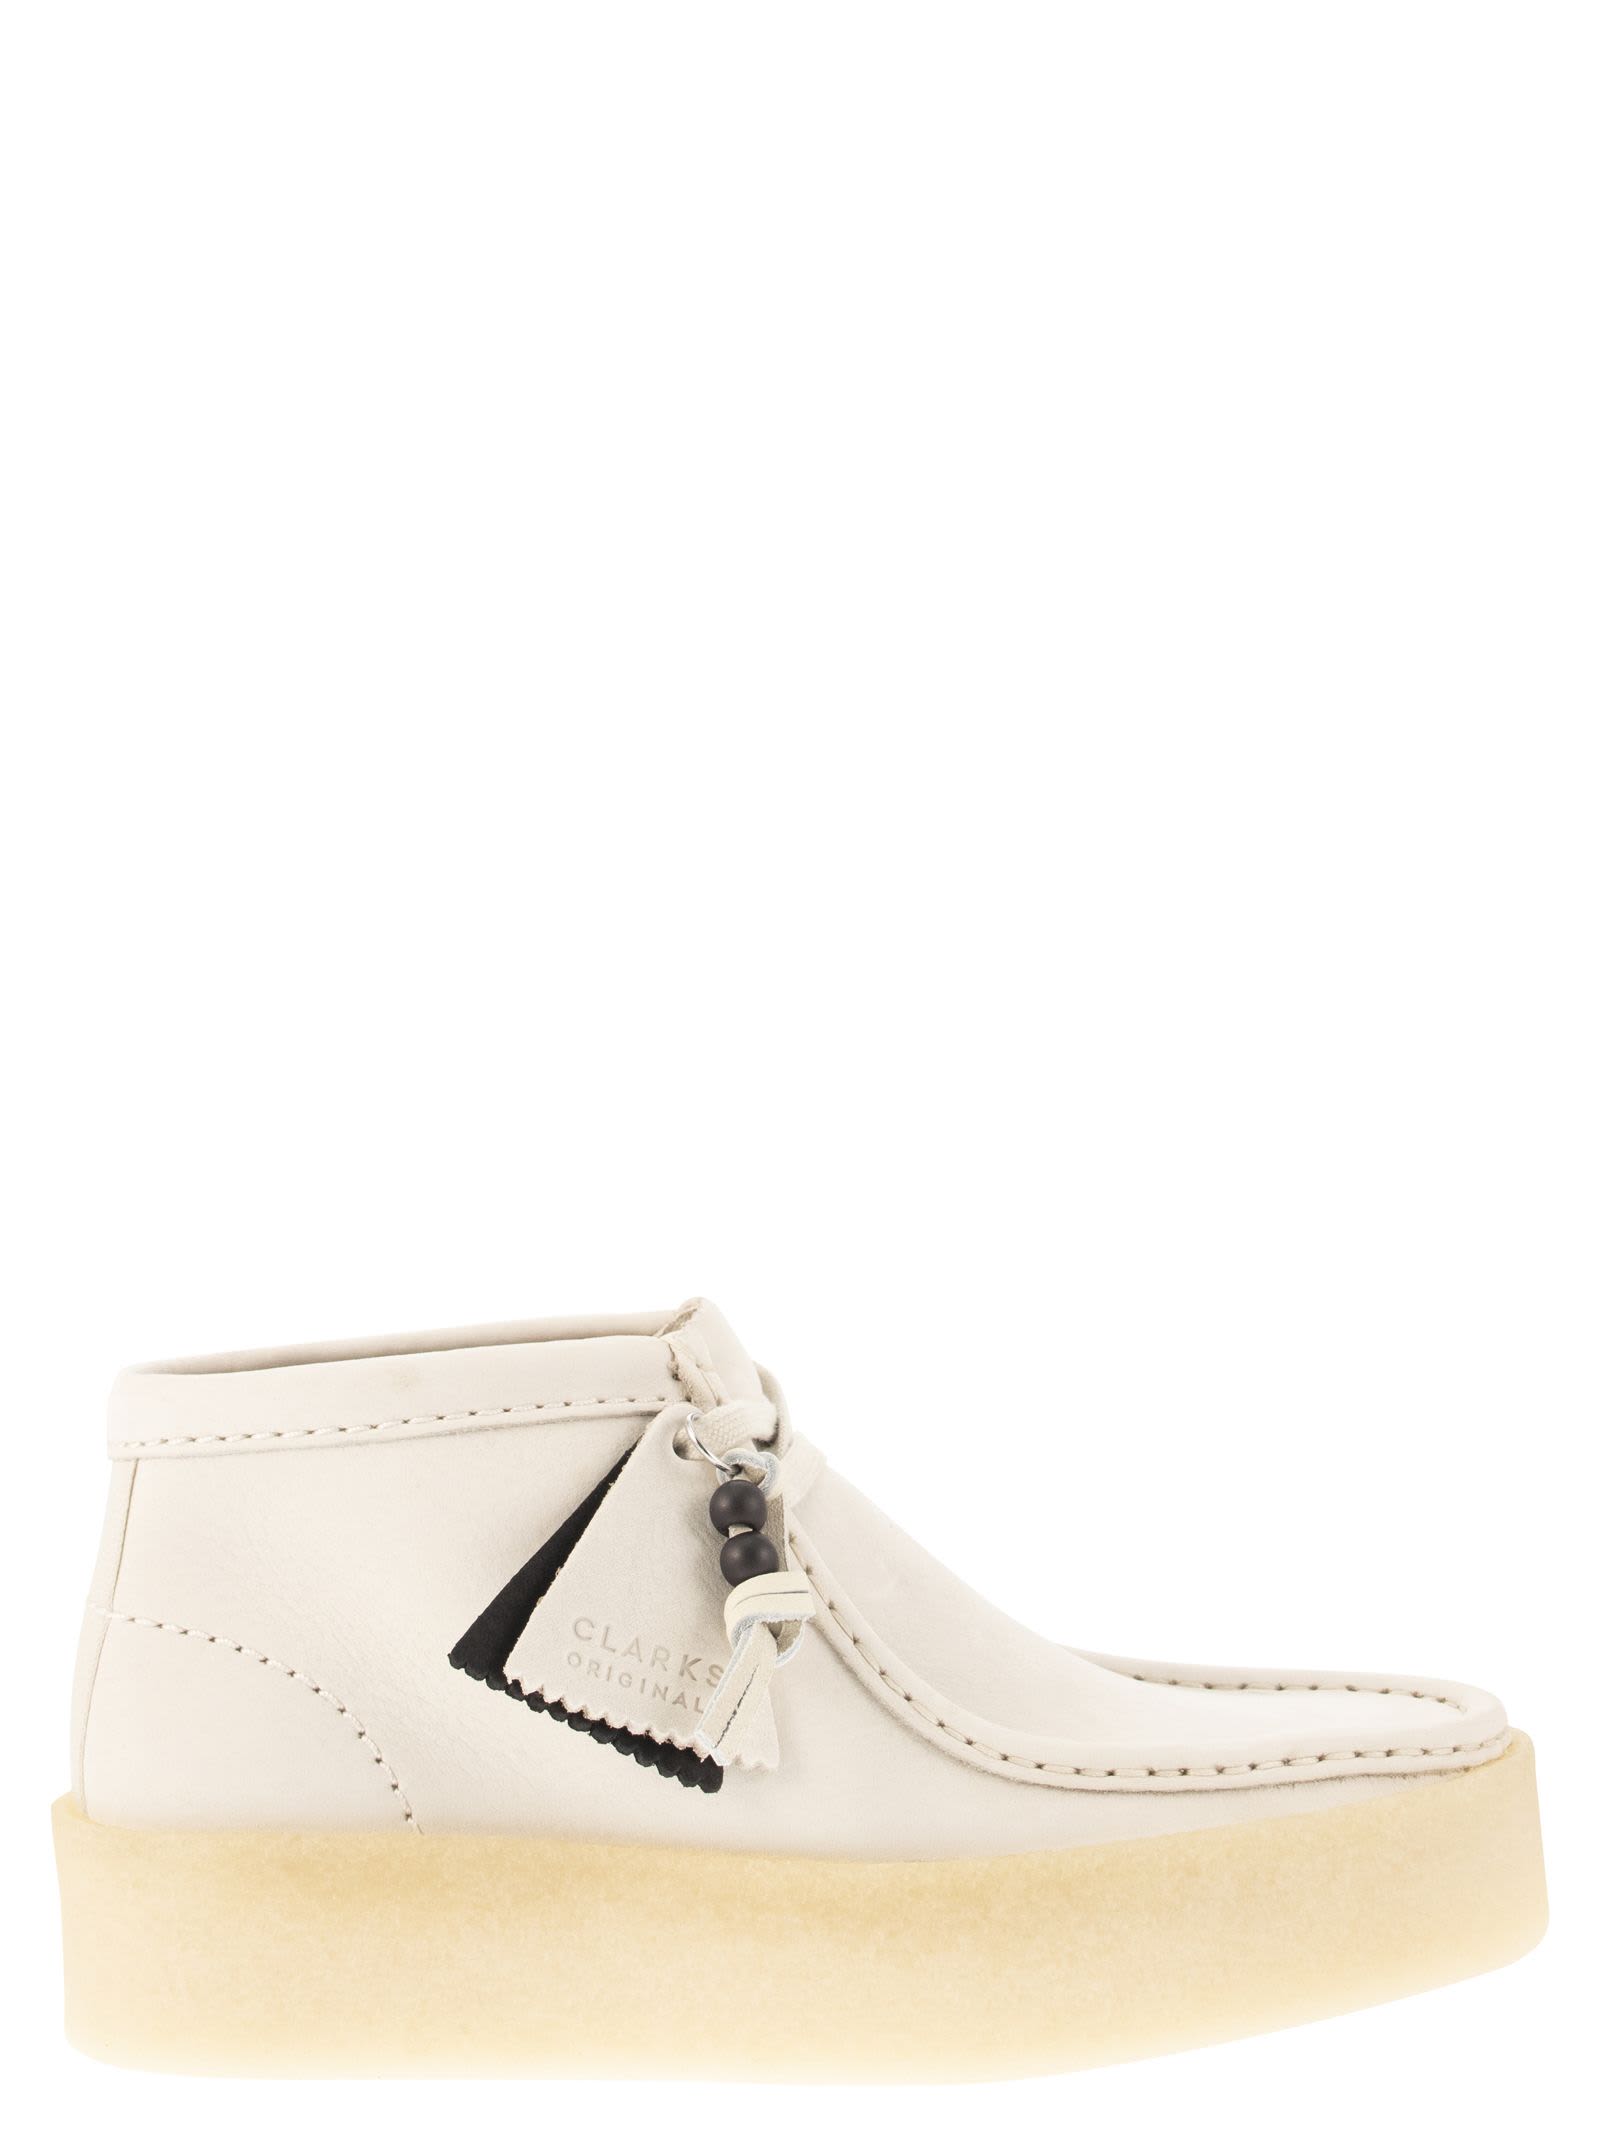 Clarks Wallabee Cup - Ankle Boot